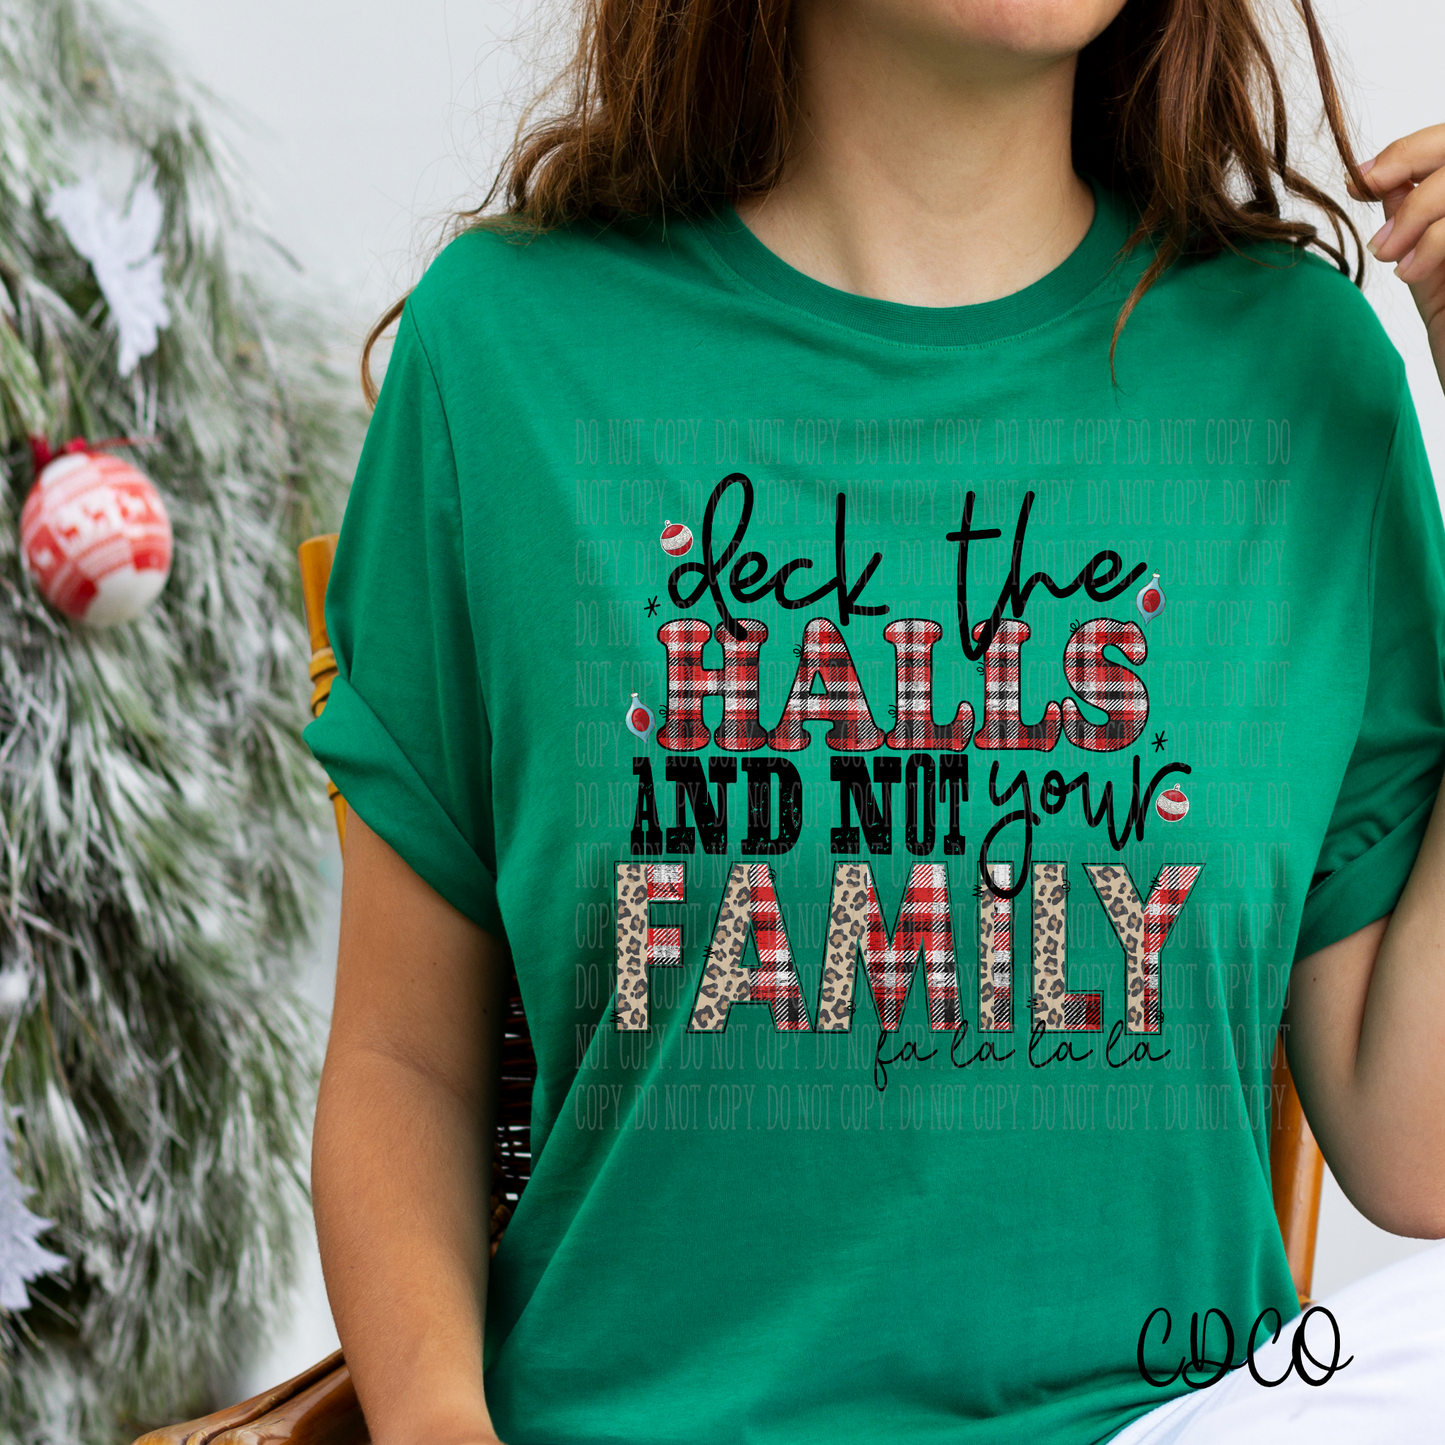 Deck the Halls Not your Family DTF (320°)